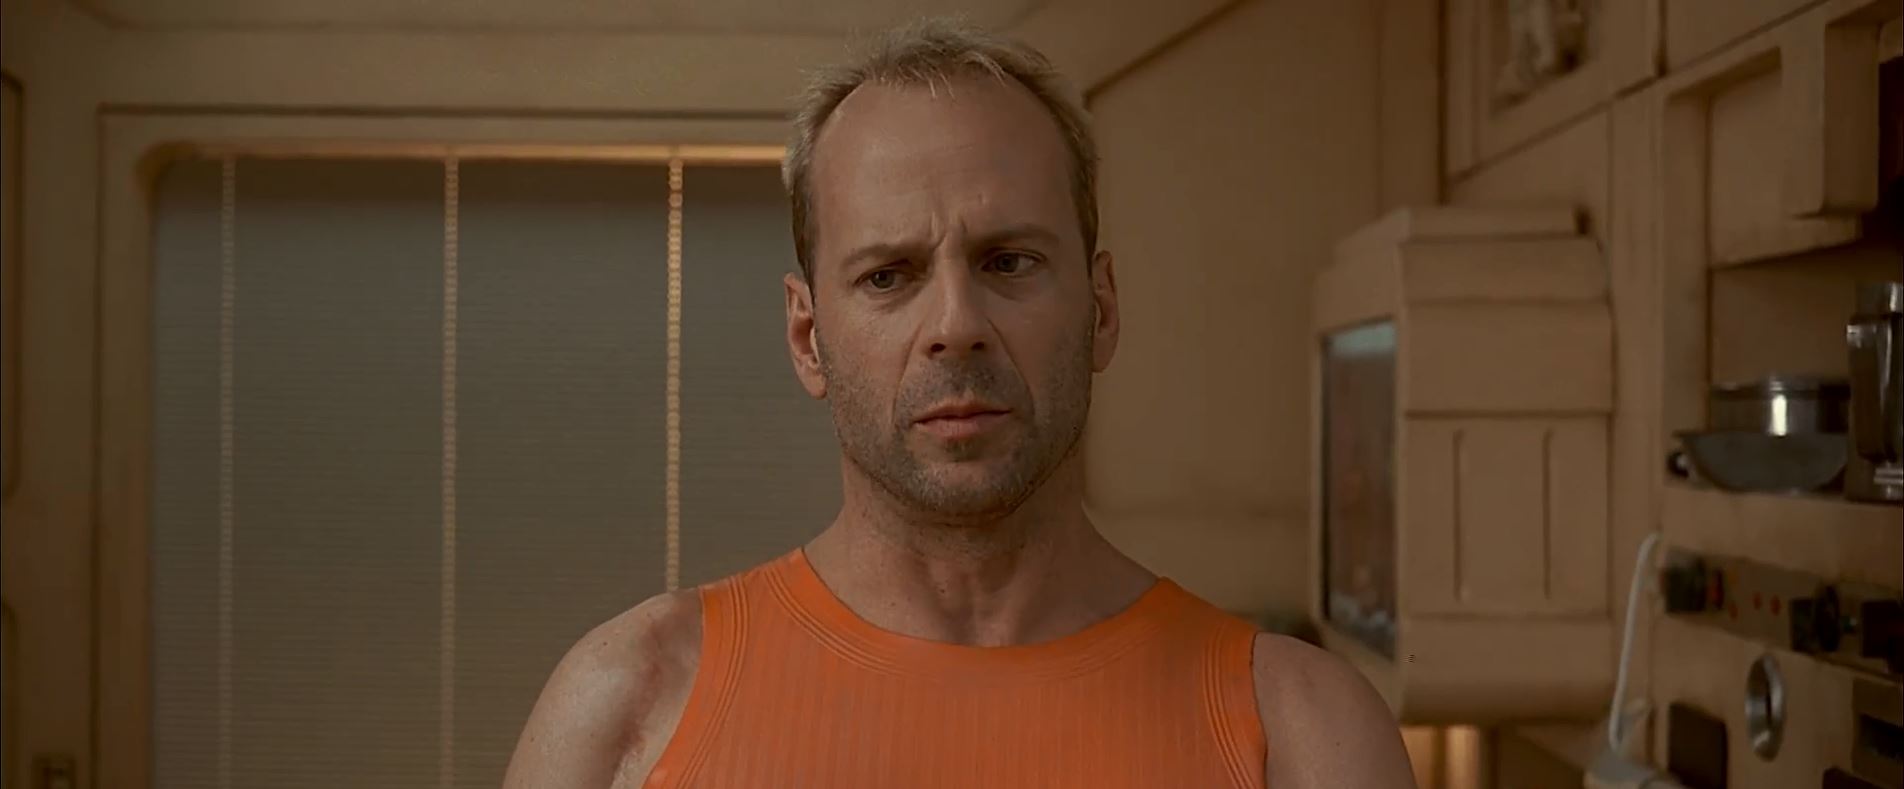 Bruce Willis as Korben Dallas - The Fifth Element